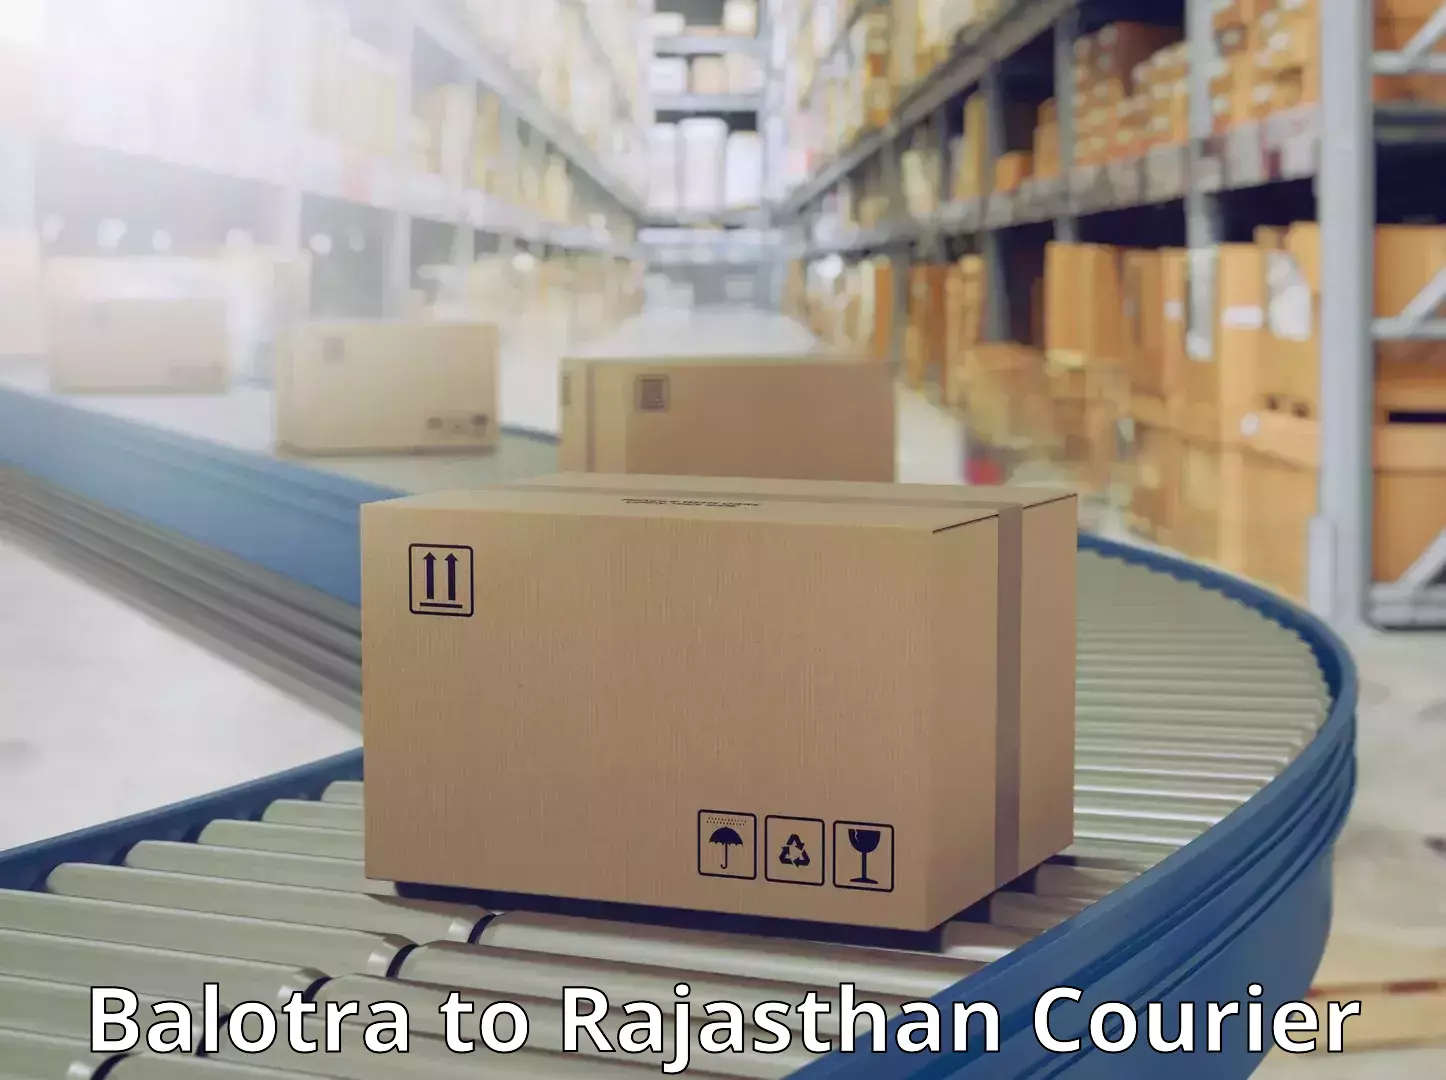 Supply chain delivery in Balotra to Rajasthan